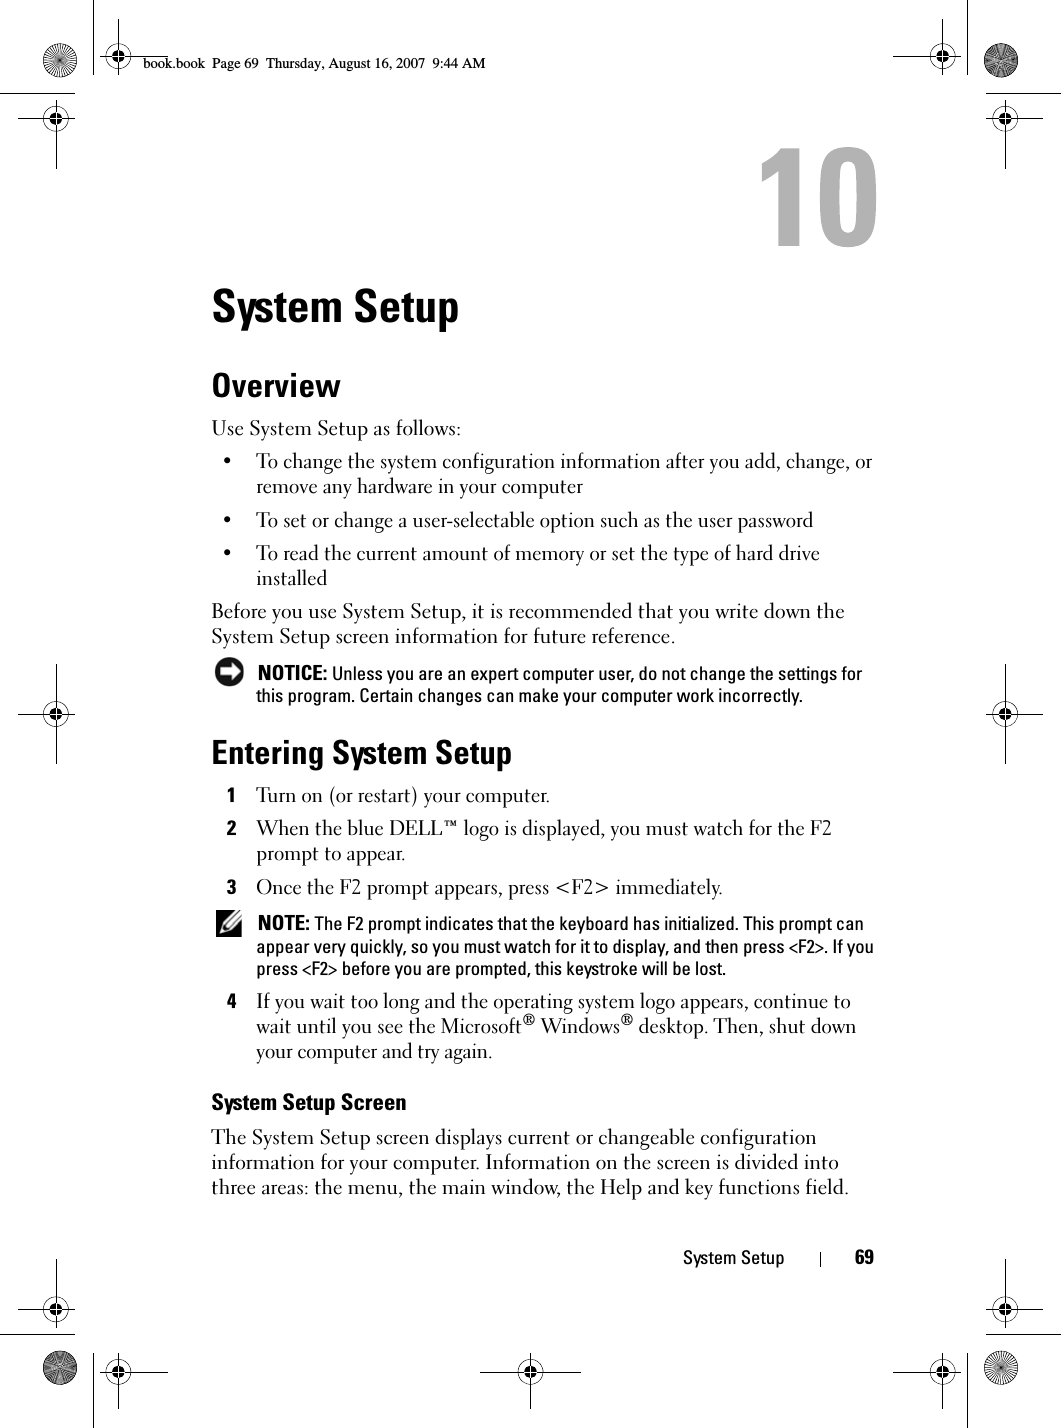 System Setup 69System SetupOverviewUse System Setup as follows: • To change the system configuration information after you add, change, or remove any hardware in your computer• To set or change a user-selectable option such as the user password• To read the current amount of memory or set the type of hard drive installedBefore you use System Setup, it is recommended that you write down the System Setup screen information for future reference. NOTICE: Unless you are an expert computer user, do not change the settings for this program. Certain changes can make your computer work incorrectly. Entering System Setup1Turn on (or restart) your computer.2When the blue DELL™ logo is displayed, you must watch for the F2 prompt to appear.3Once the F2 prompt appears, press &lt;F2&gt; immediately. NOTE: The F2 prompt indicates that the keyboard has initialized. This prompt can appear very quickly, so you must watch for it to display, and then press &lt;F2&gt;. If you press &lt;F2&gt; before you are prompted, this keystroke will be lost.4If you wait too long and the operating system logo appears, continue to wait until you see the Microsoft® Windows® desktop. Then, shut down your computer and try again.System Setup ScreenThe System Setup screen displays current or changeable configuration information for your computer. Information on the screen is divided into three areas: the menu, the main window, the Help and key functions field.book.book  Page 69  Thursday, August 16, 2007  9:44 AM